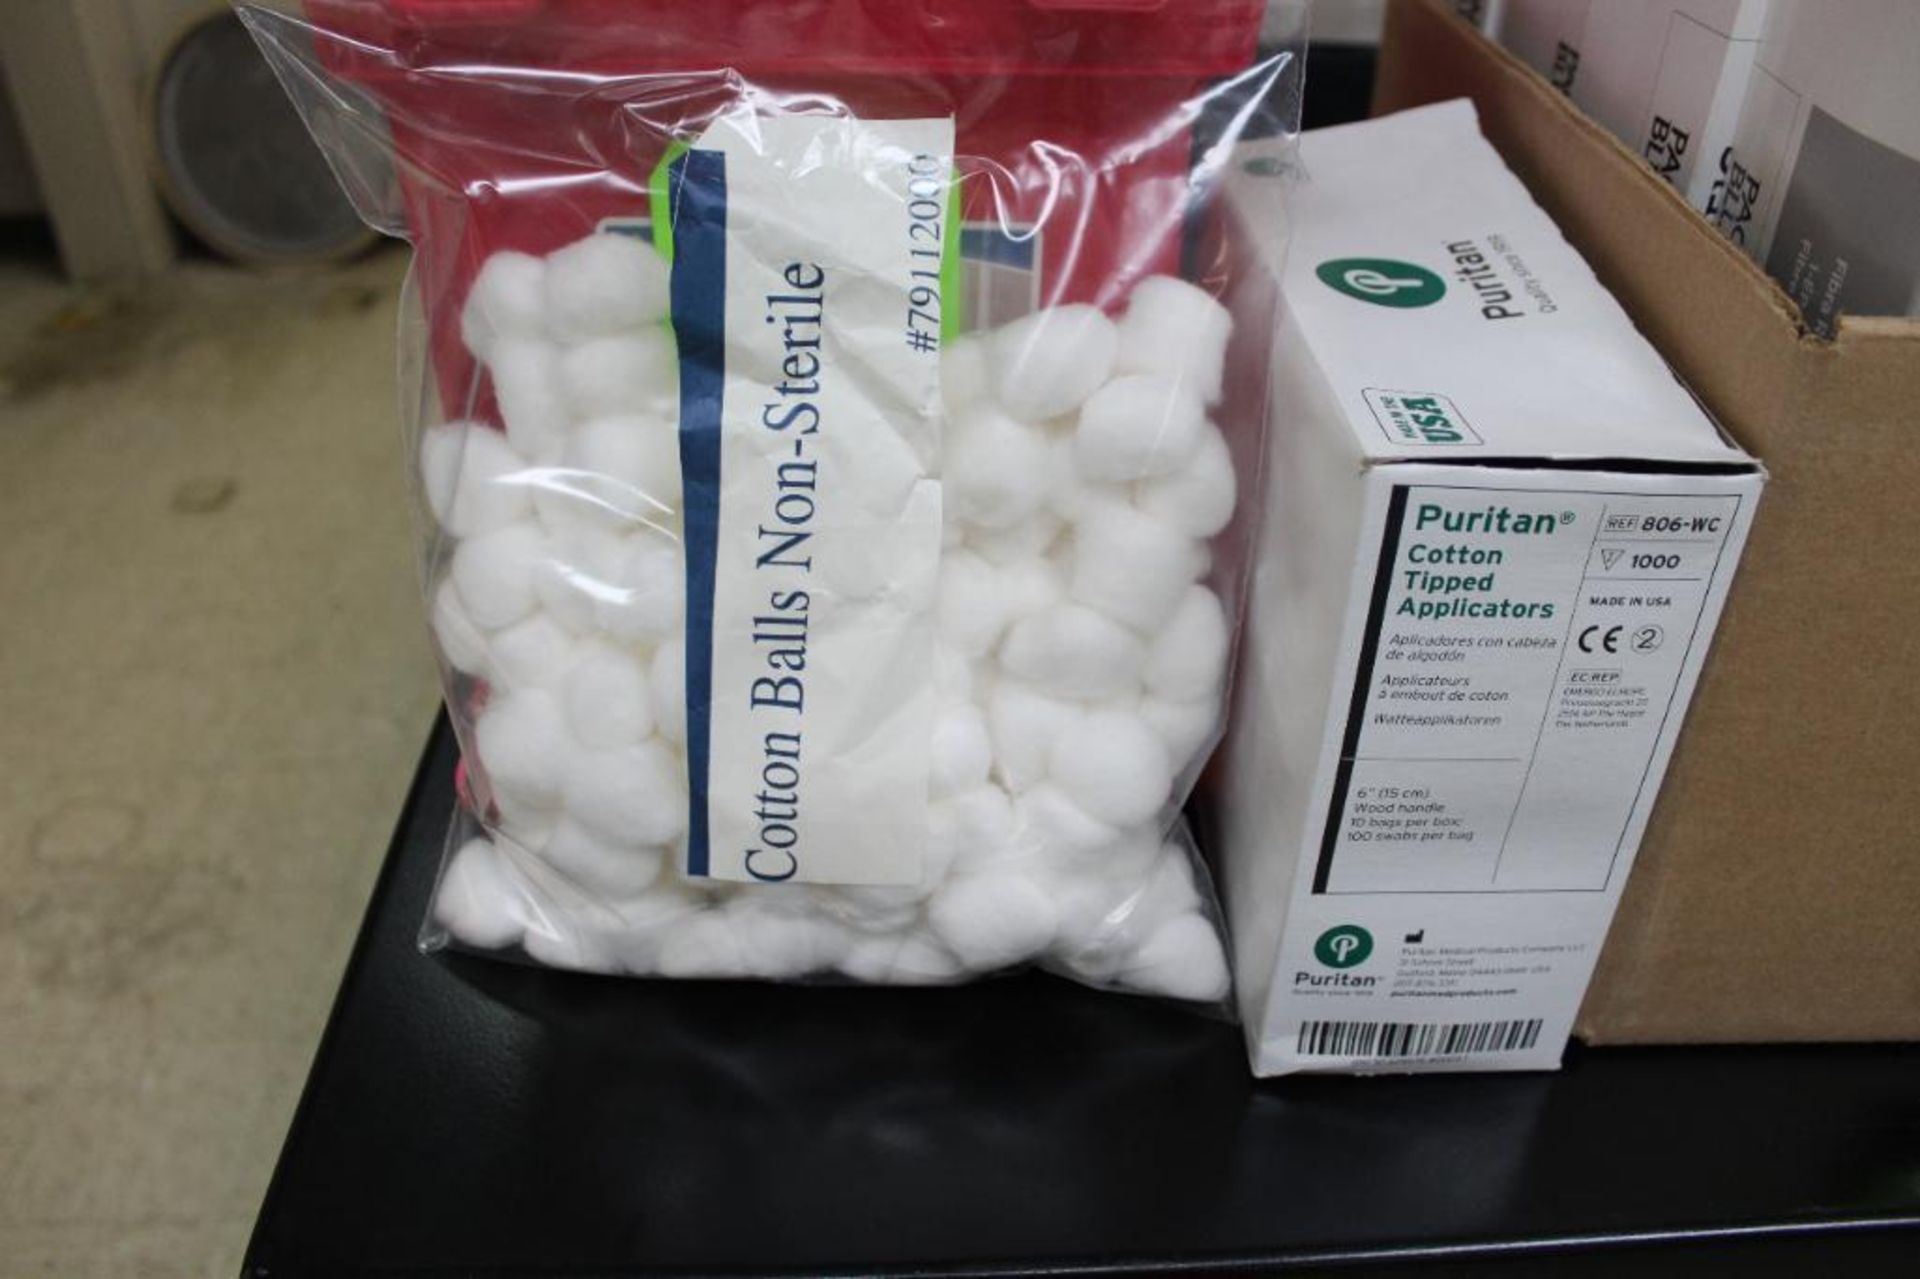 Lot of Kimberly Clark Precision Wipes, Puritan Cotton Tipped Applicators and Non Sterile Cottonballs - Image 4 of 4